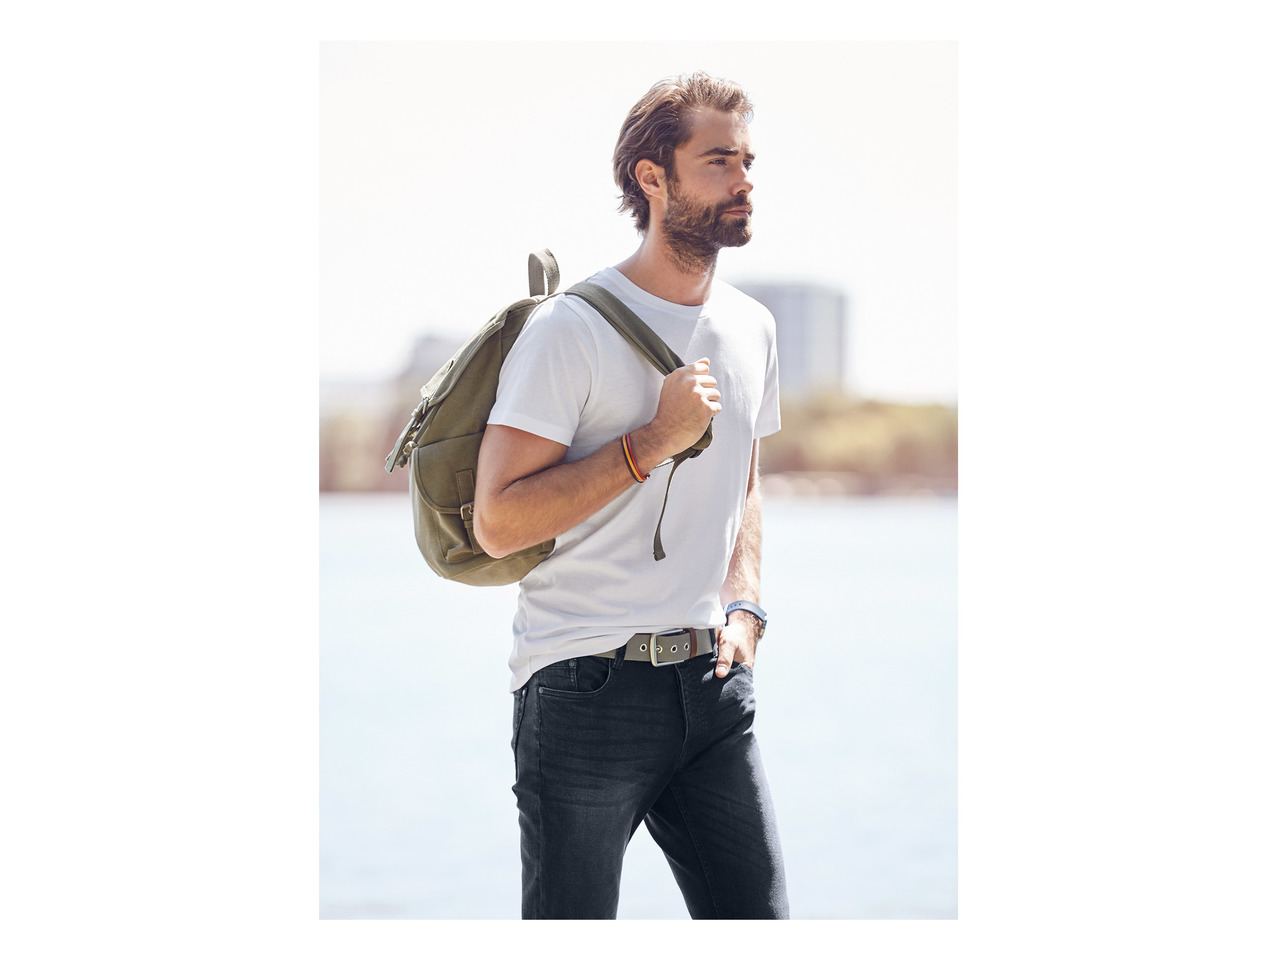 Livergy Canvas Backpack1